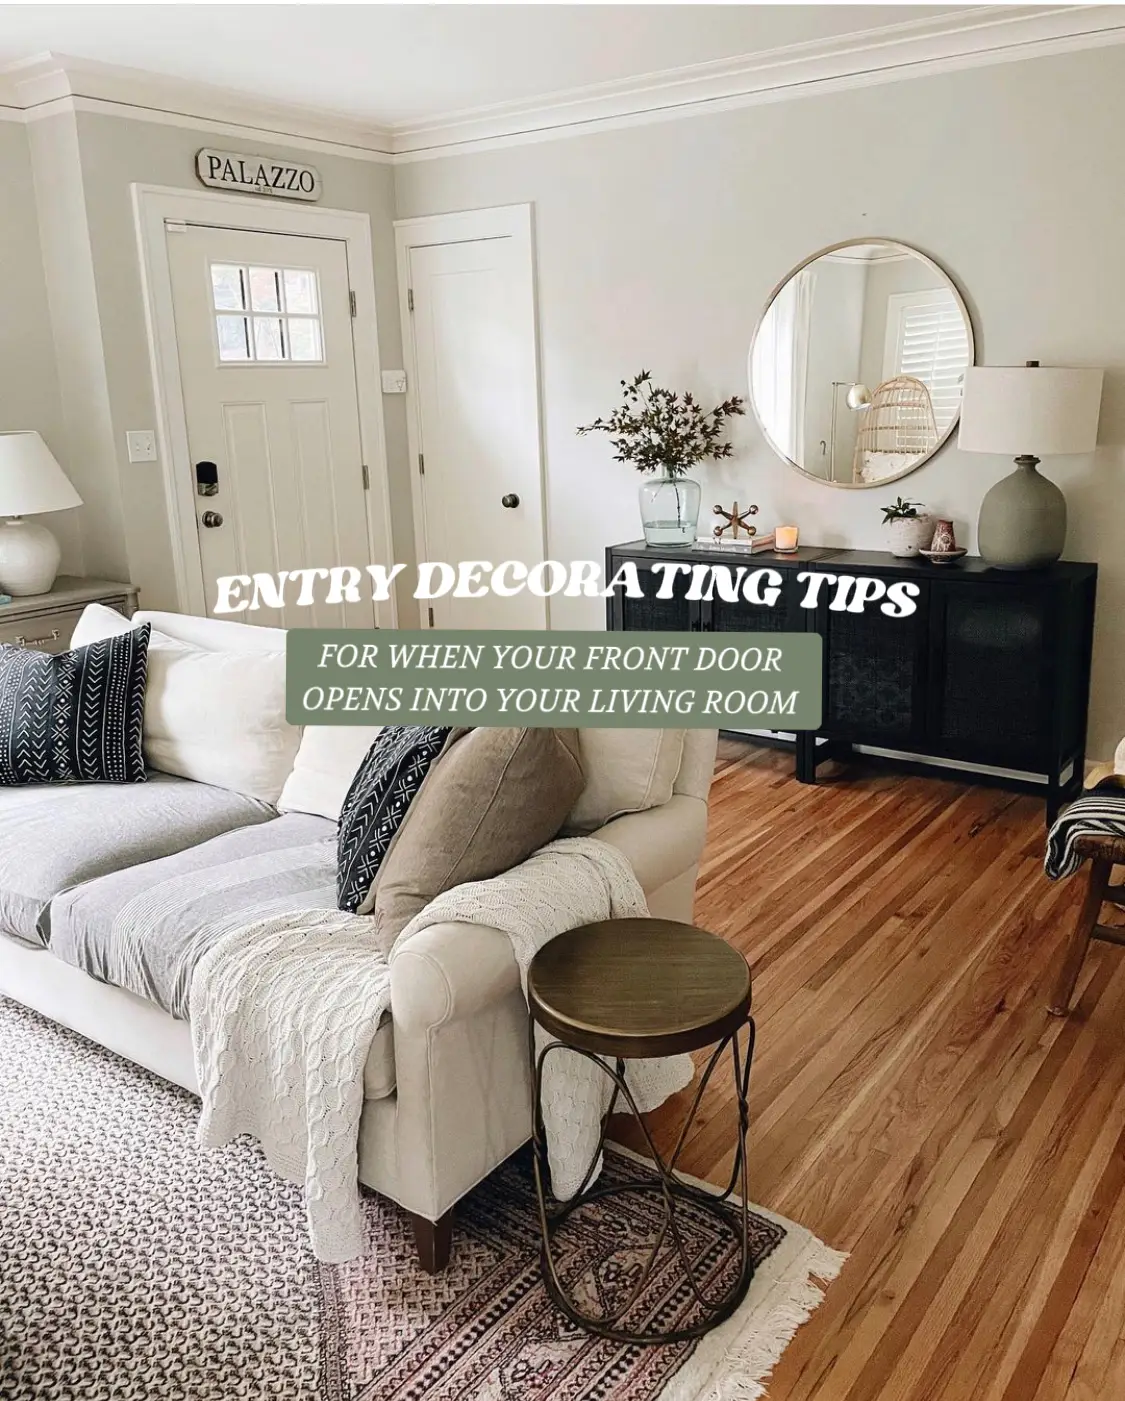 Entry Decorating Tips | Gallery posted by Kylee Noelle | Lemon8